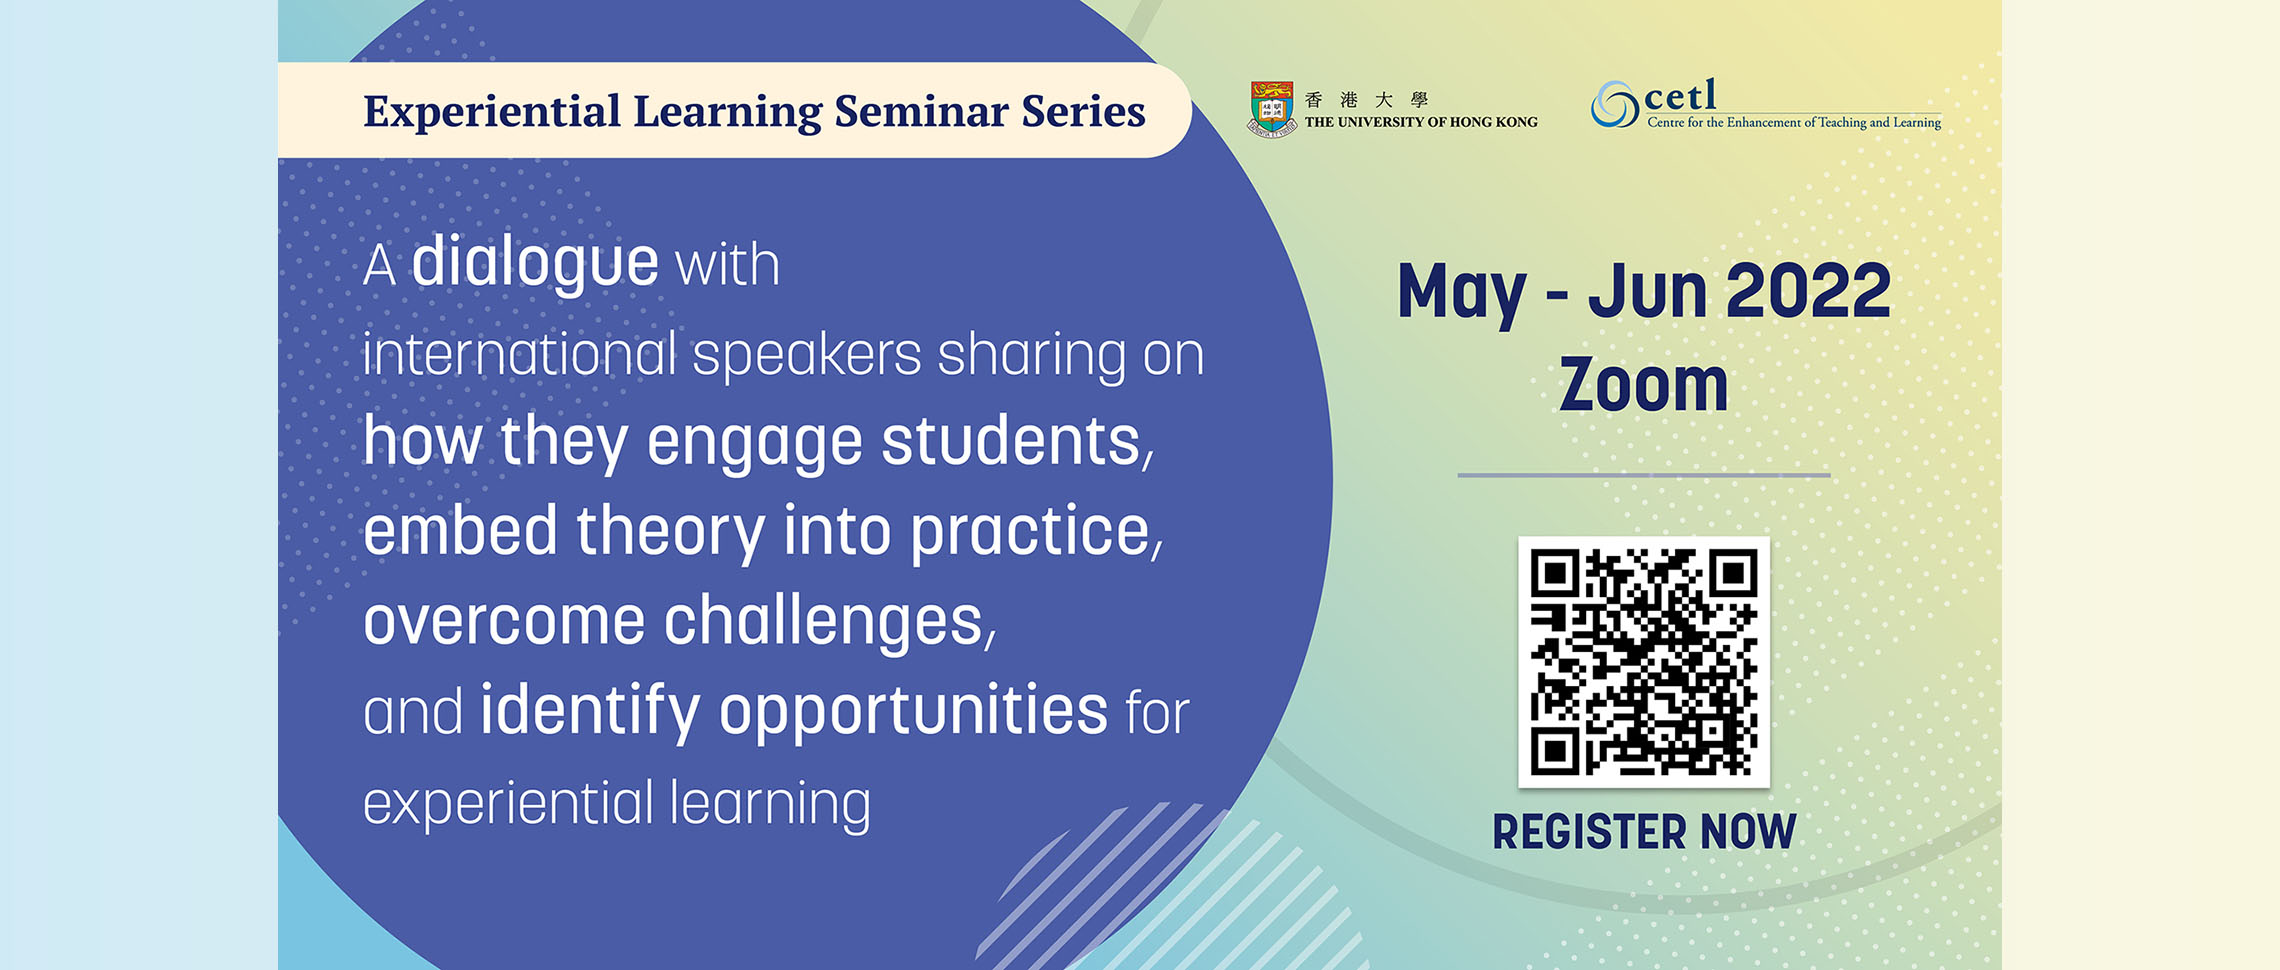 Experiential Learning Seminar Series